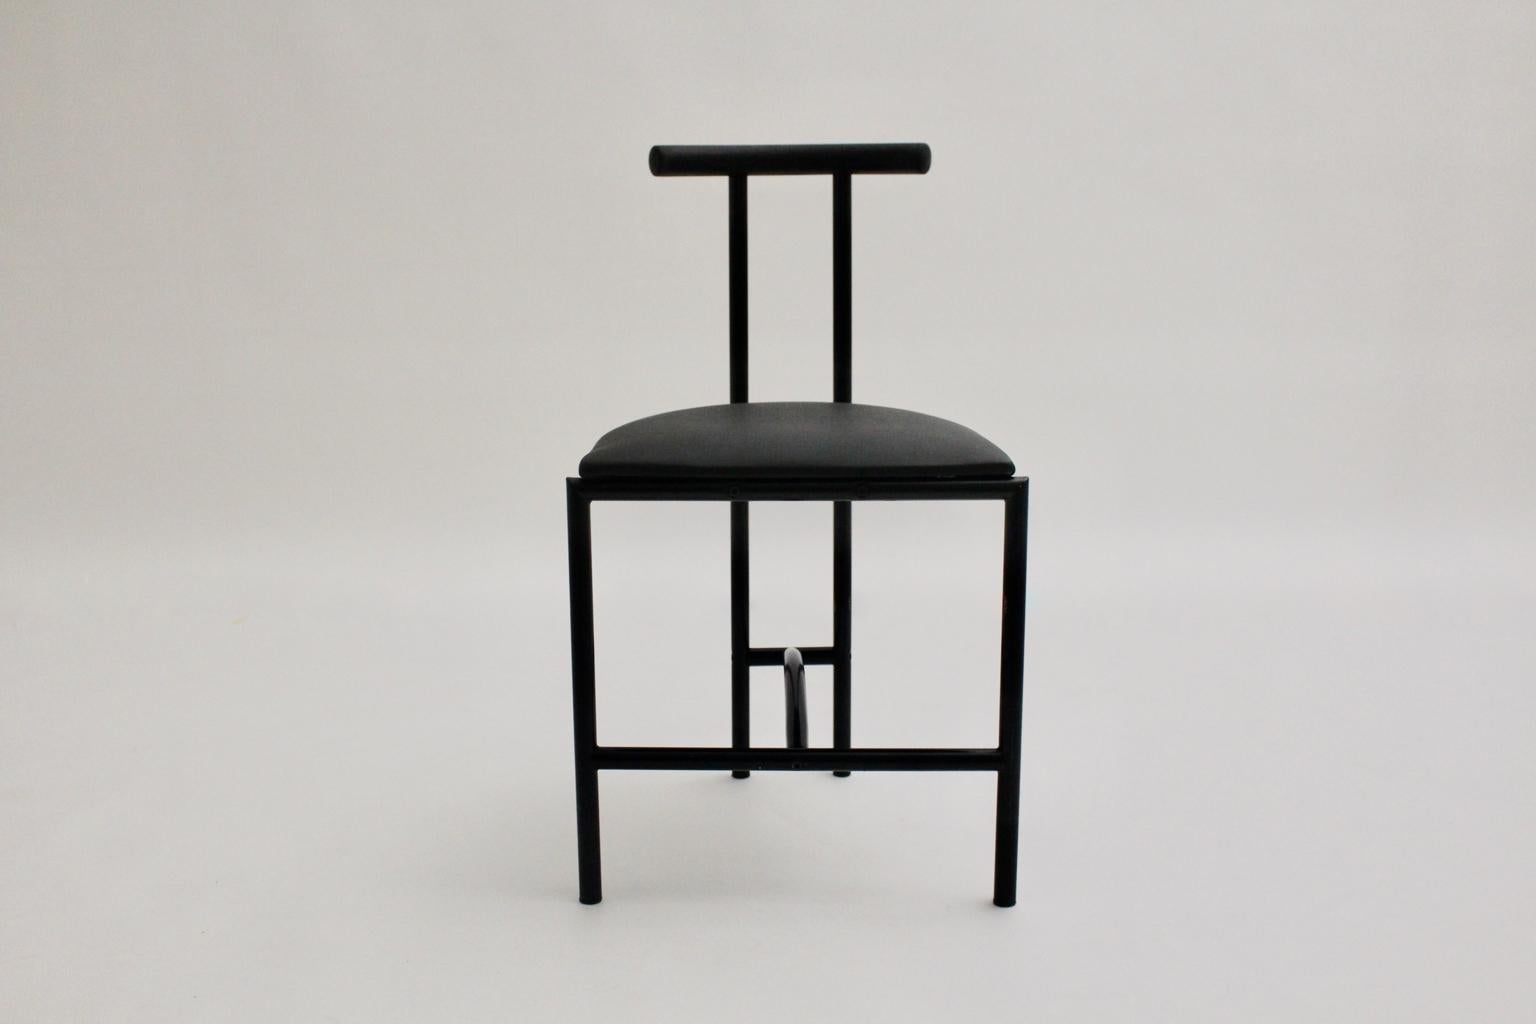 Modern vintage chair was designed by Rodney Kinsman 1985 United Kingdom and made of black lacquered tube steel and a covered seat features black faux leather.
Very good vintage condition
Approximate measures:
Width 43.5 cm
Depth 41 cm
Height 74.5